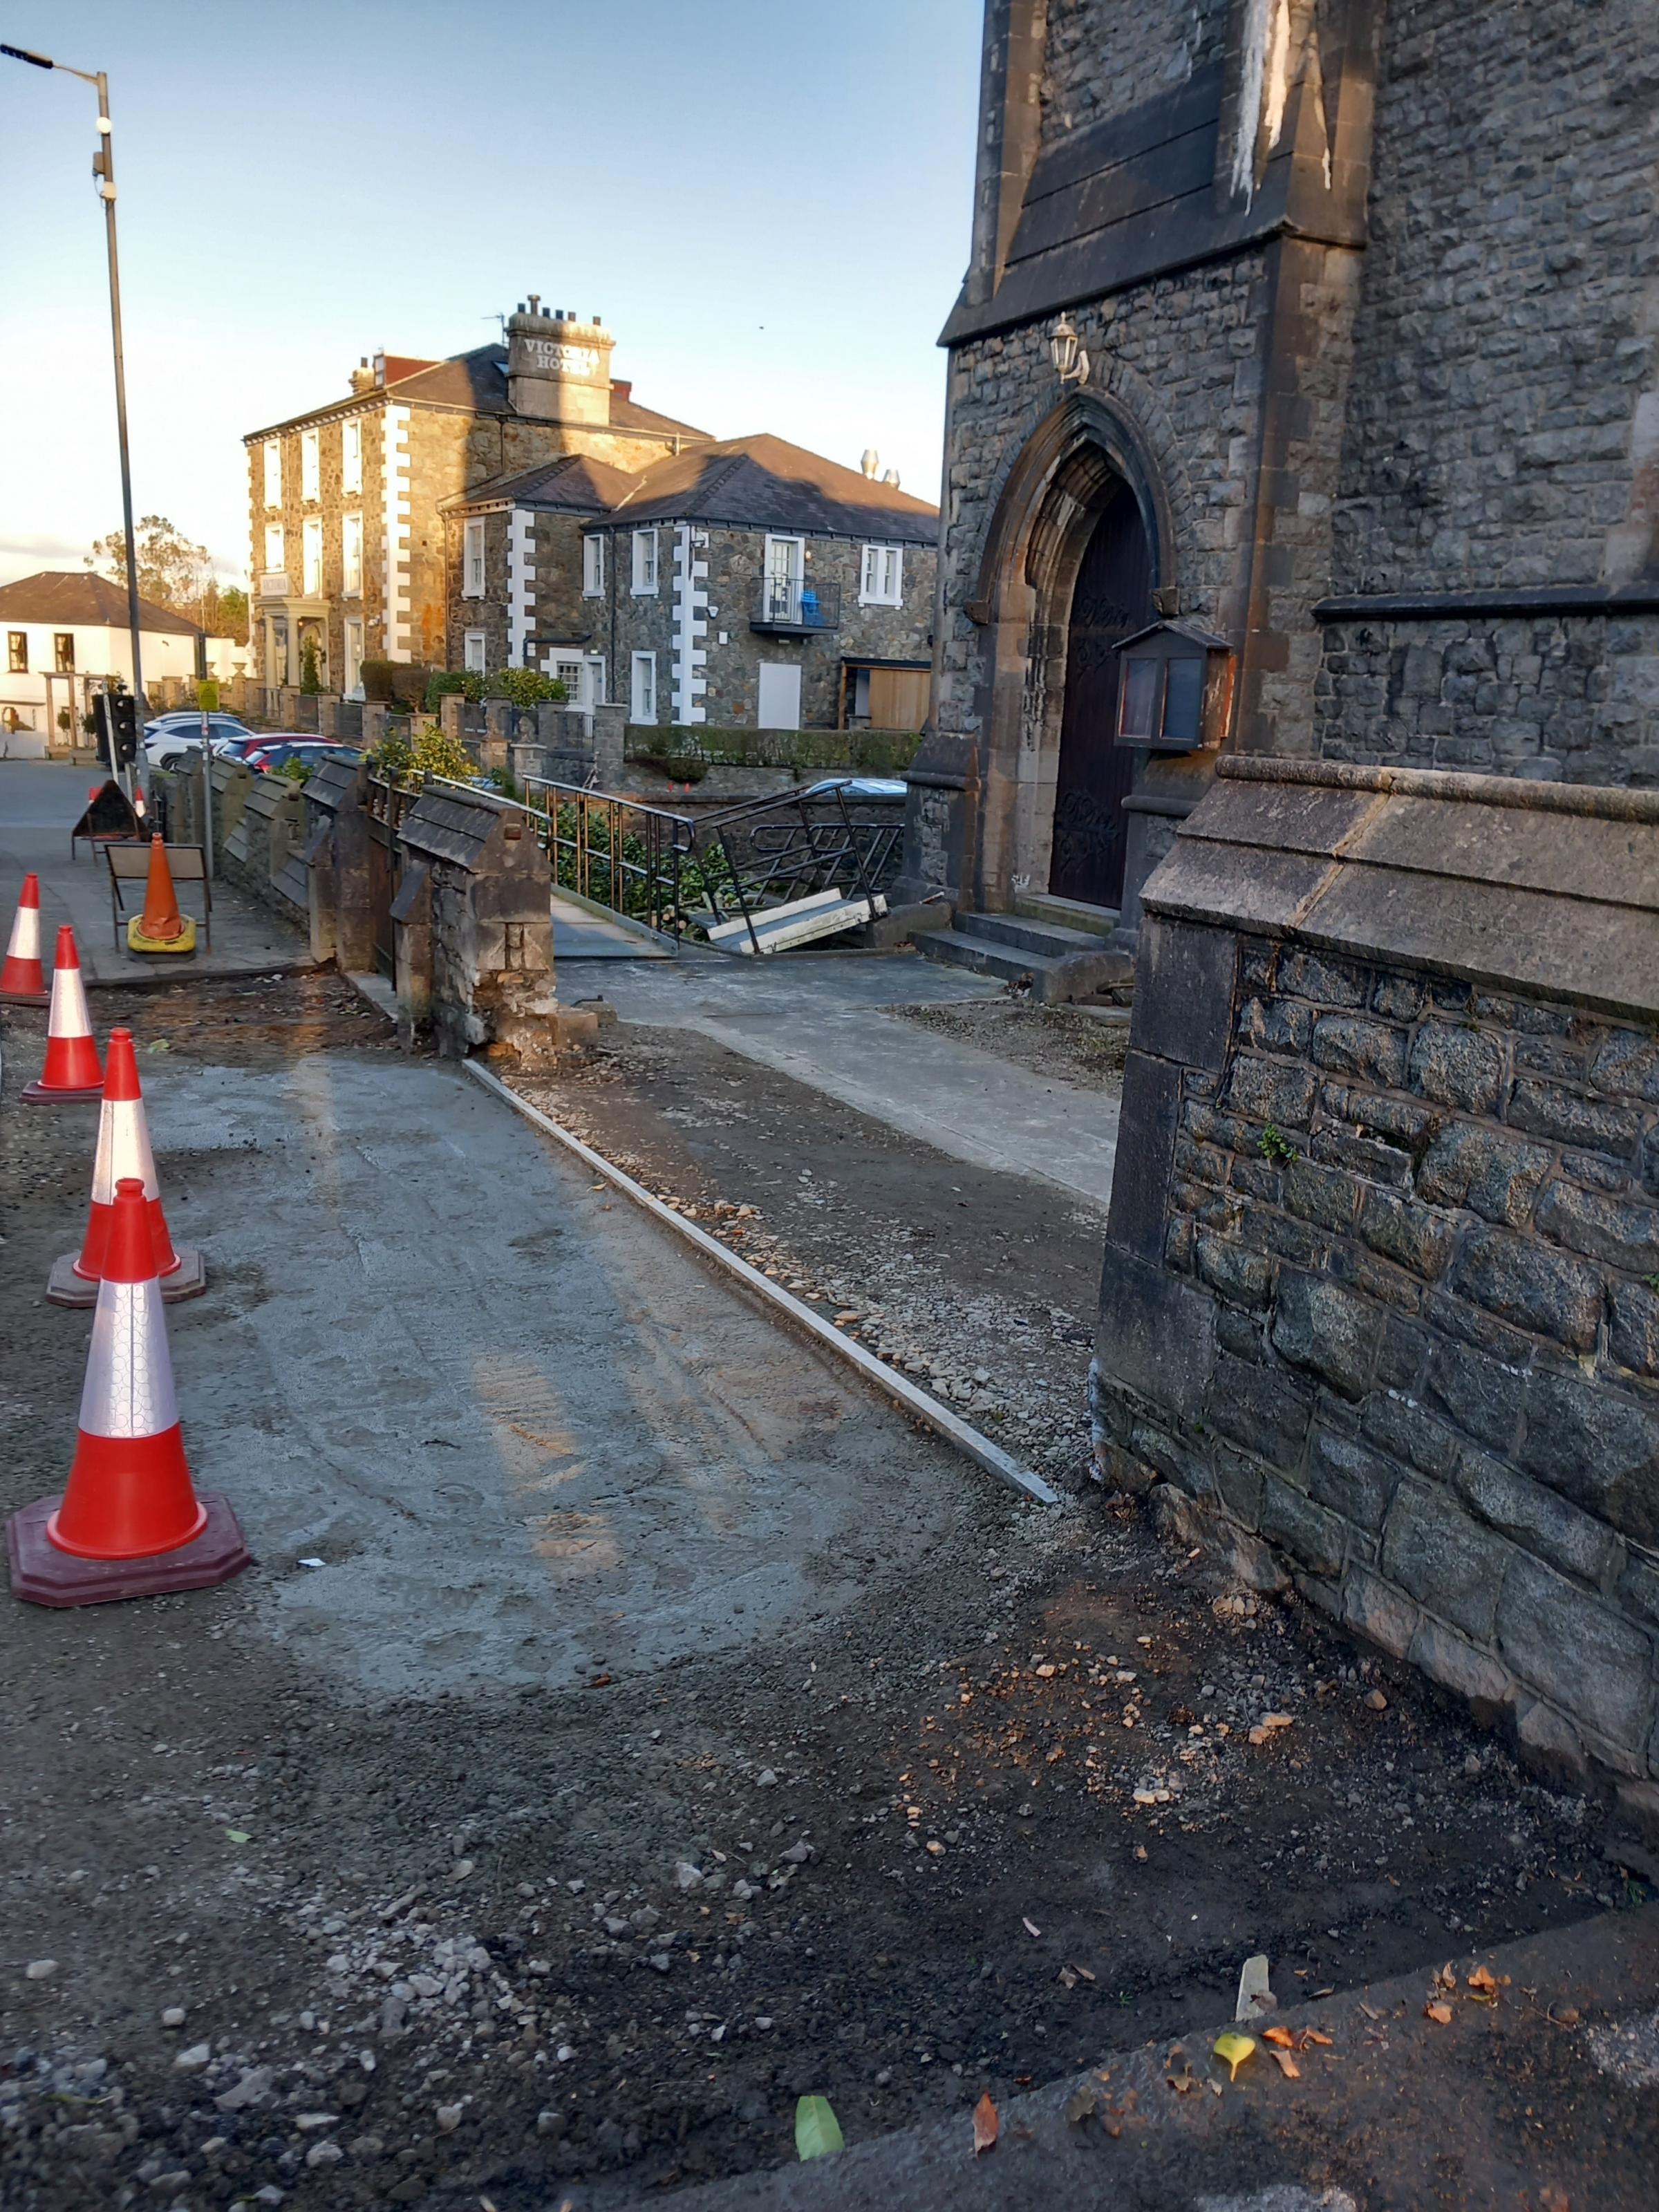 Work on entrance at English Presbyterian Church, Menai Bridge will soon be completed development of home and holiday let (Image Dale Spridgeon)